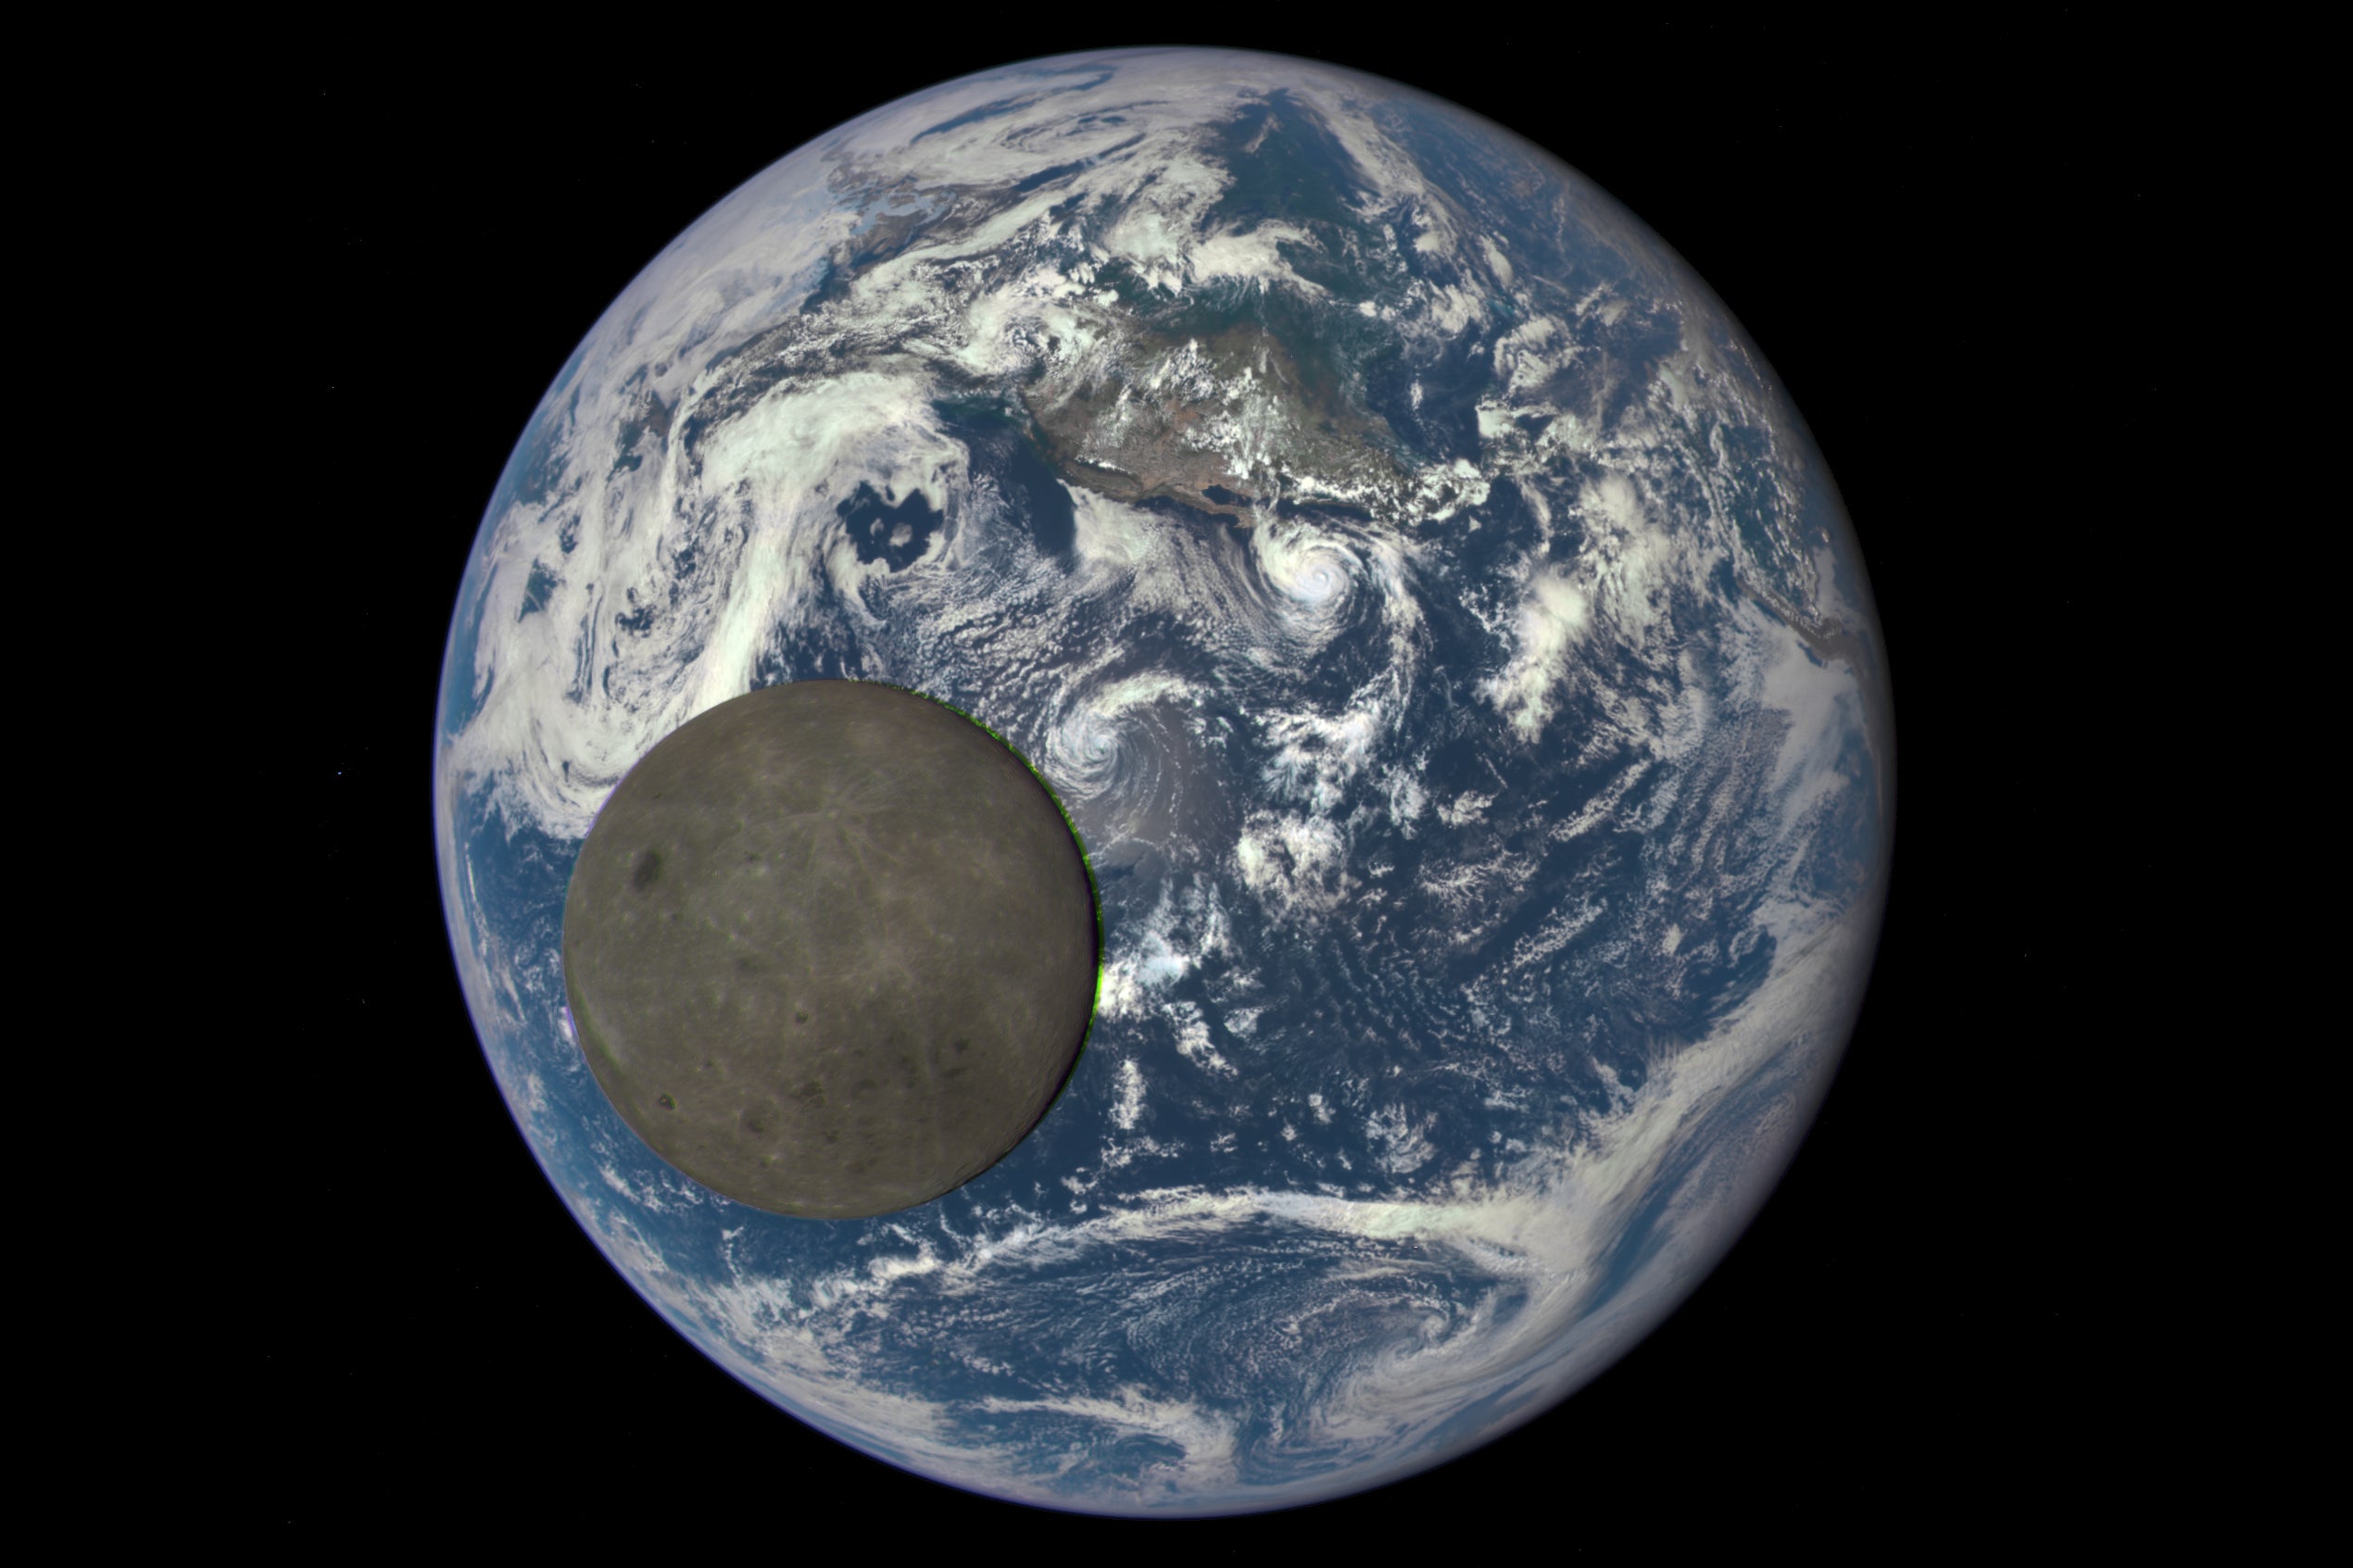 A view of the far side of the moon directly in front of the Earth, illuminated by the sun